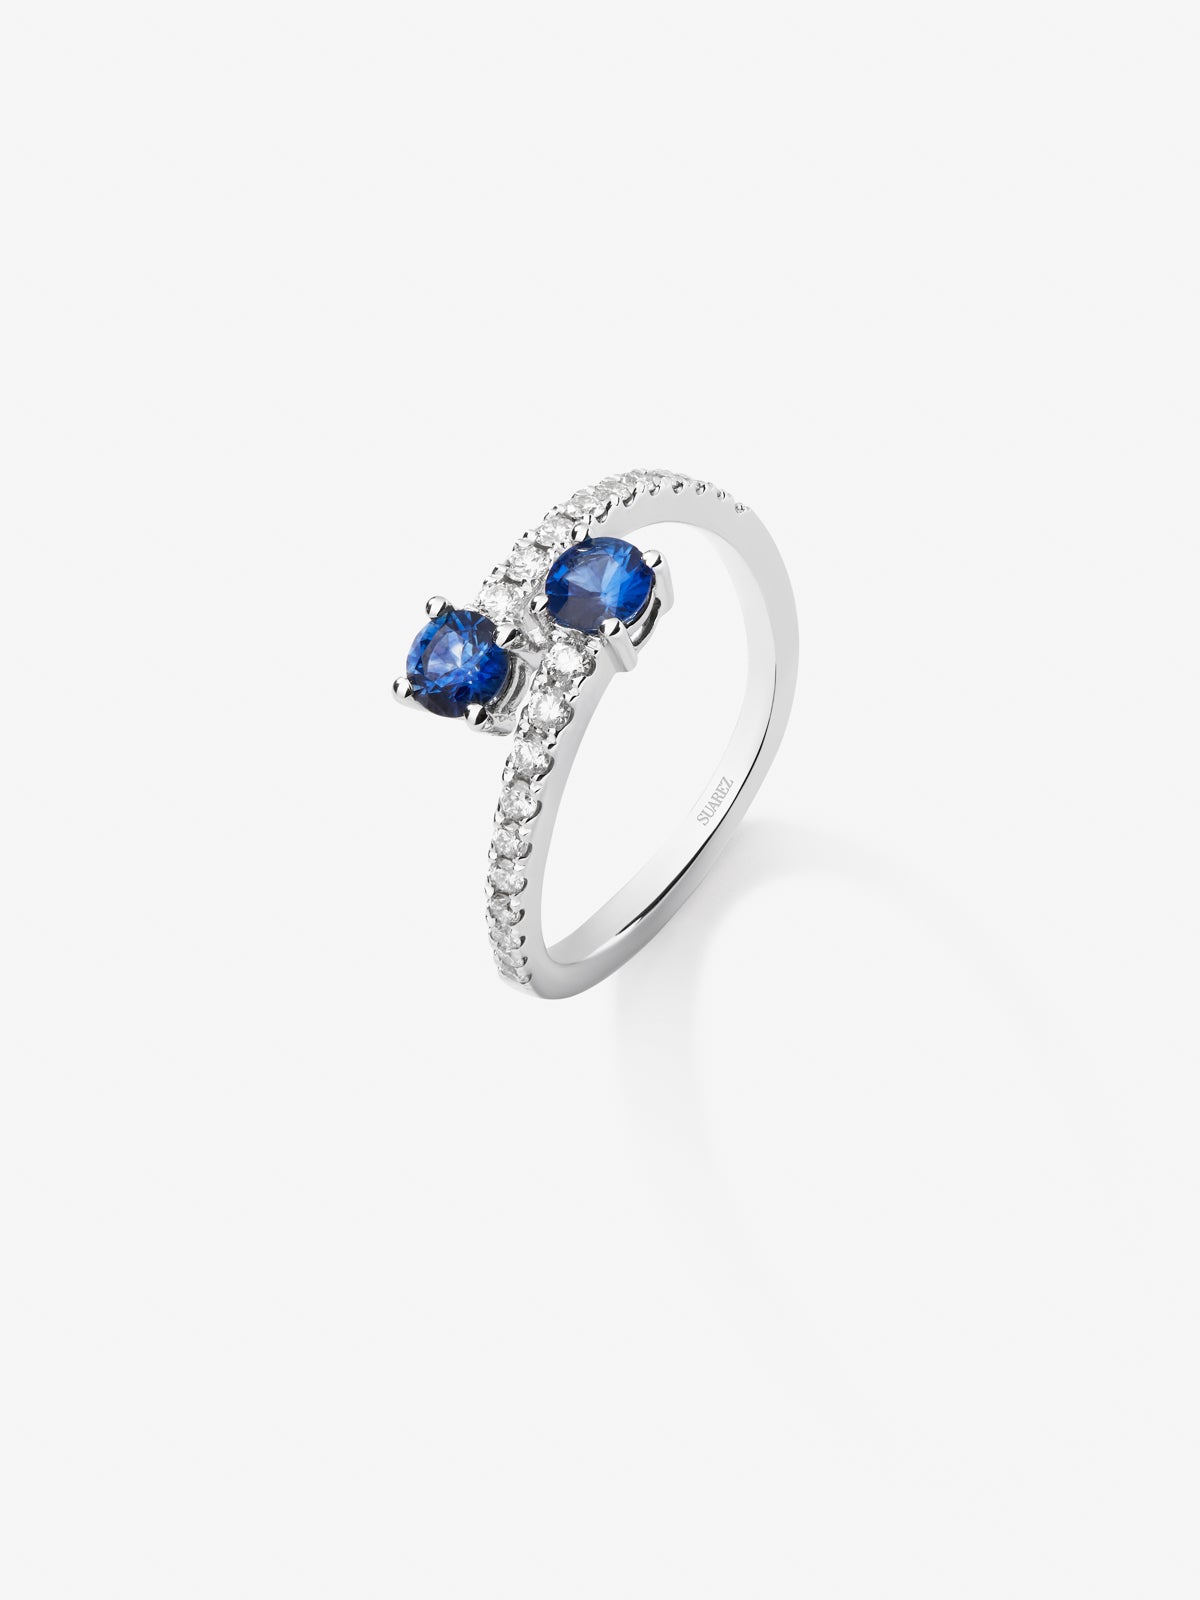 You and me ring in 18K white gold with 2 brilliant-cut sapphires with a total of 0.82 cts and 20 brilliant-cut diamonds with a total of 0.36 cts